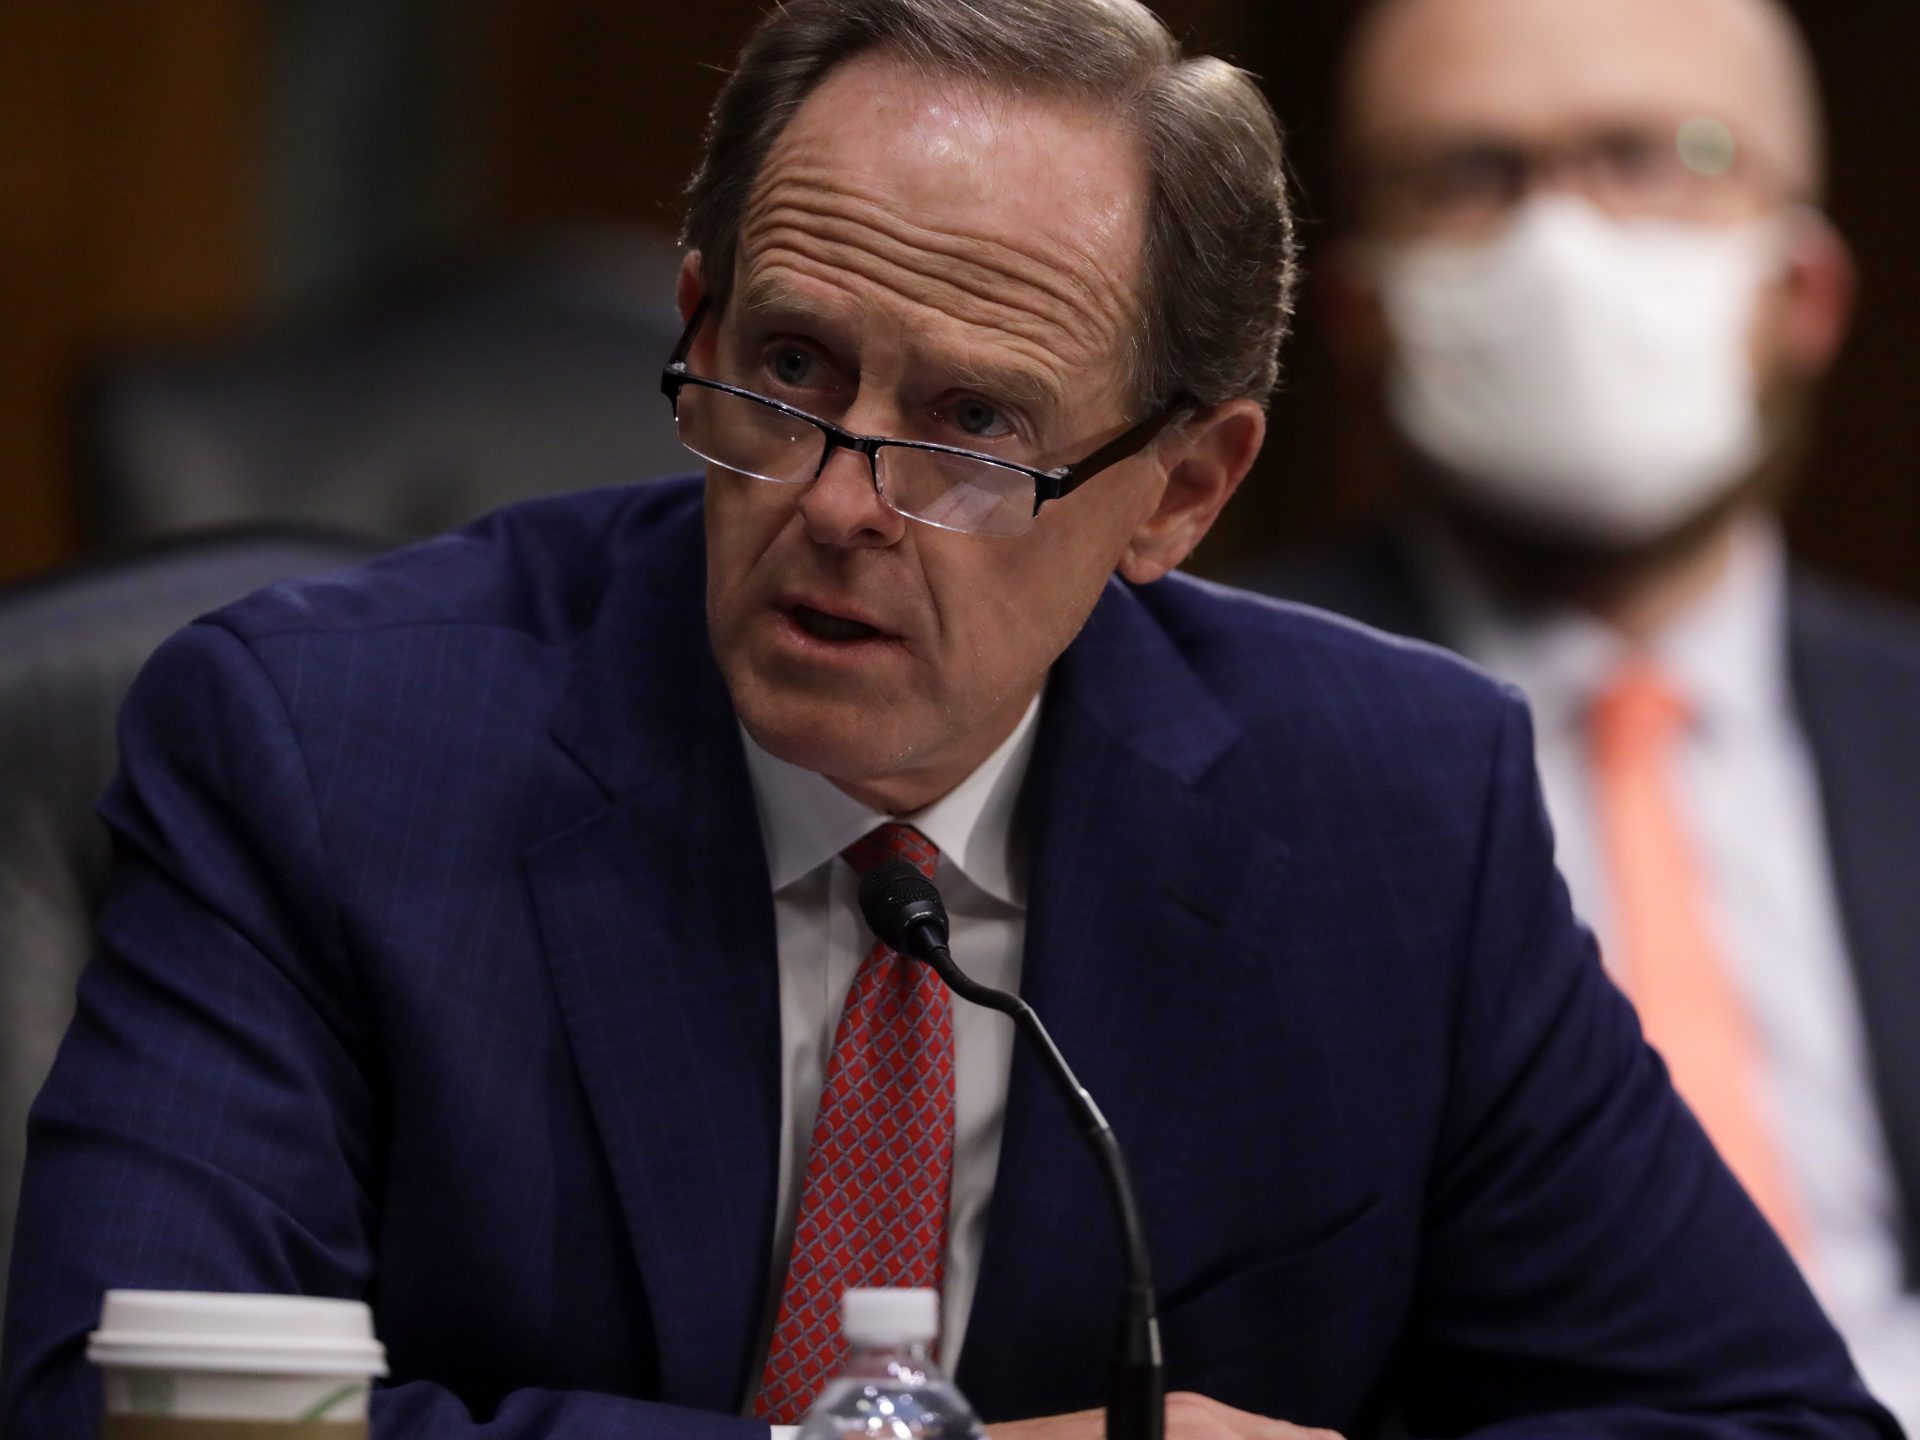 Republican Sen. Pat Toomey of Pennsylvania, seen here during a confirmation hearing in May, urged President Trump to accept the outcome of the presidential election.